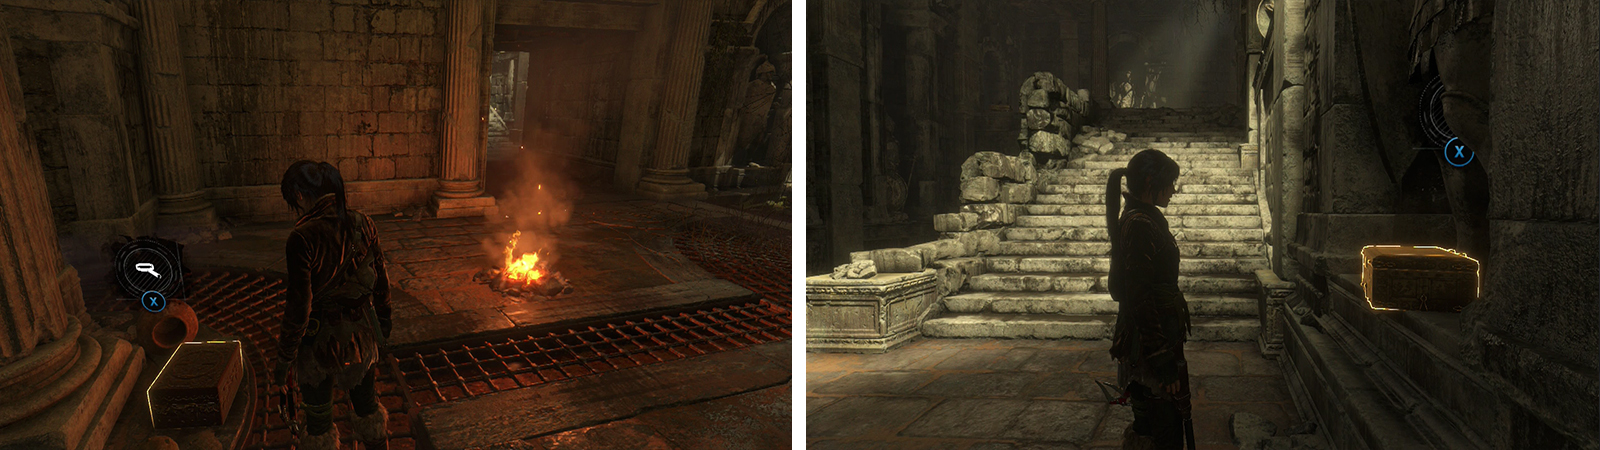 Relic 12 can be found by the Base Camp (left) and Relic 13 is found in the next room at the base of the set of stairs (right).